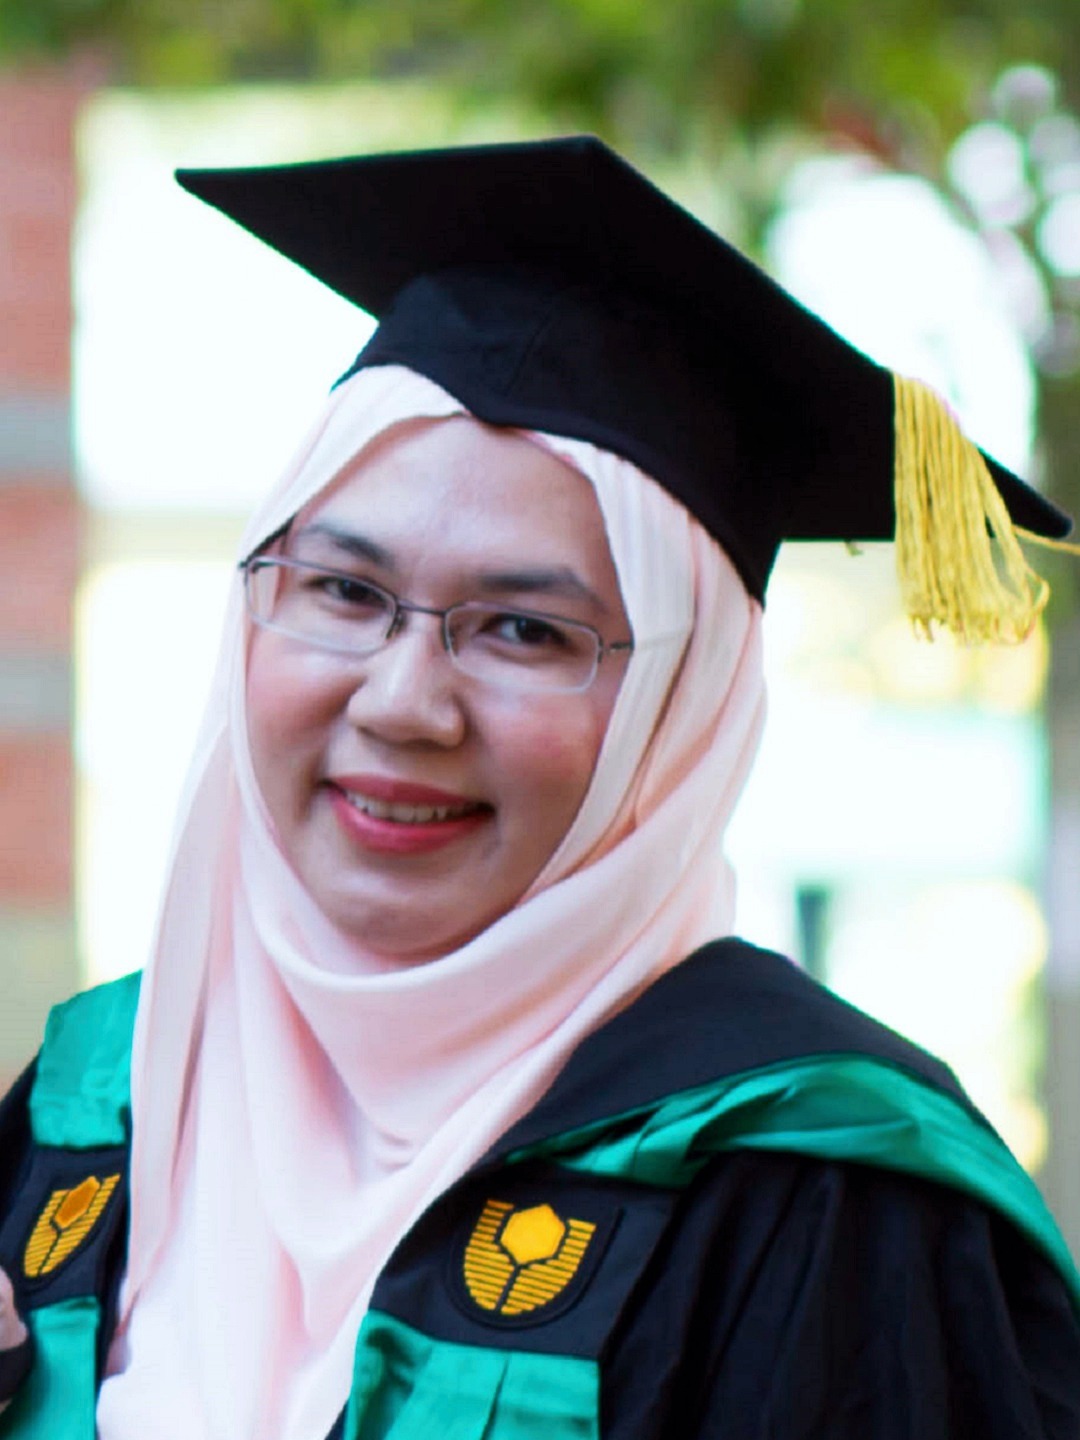 “Encouraged by my brother’s determination in pursuing his studies at Curtin Malaysia and with the encouragement of my parents, I decided to enroll in the Master of Science in Project Management at Curtin Malaysia. “My experience on various...